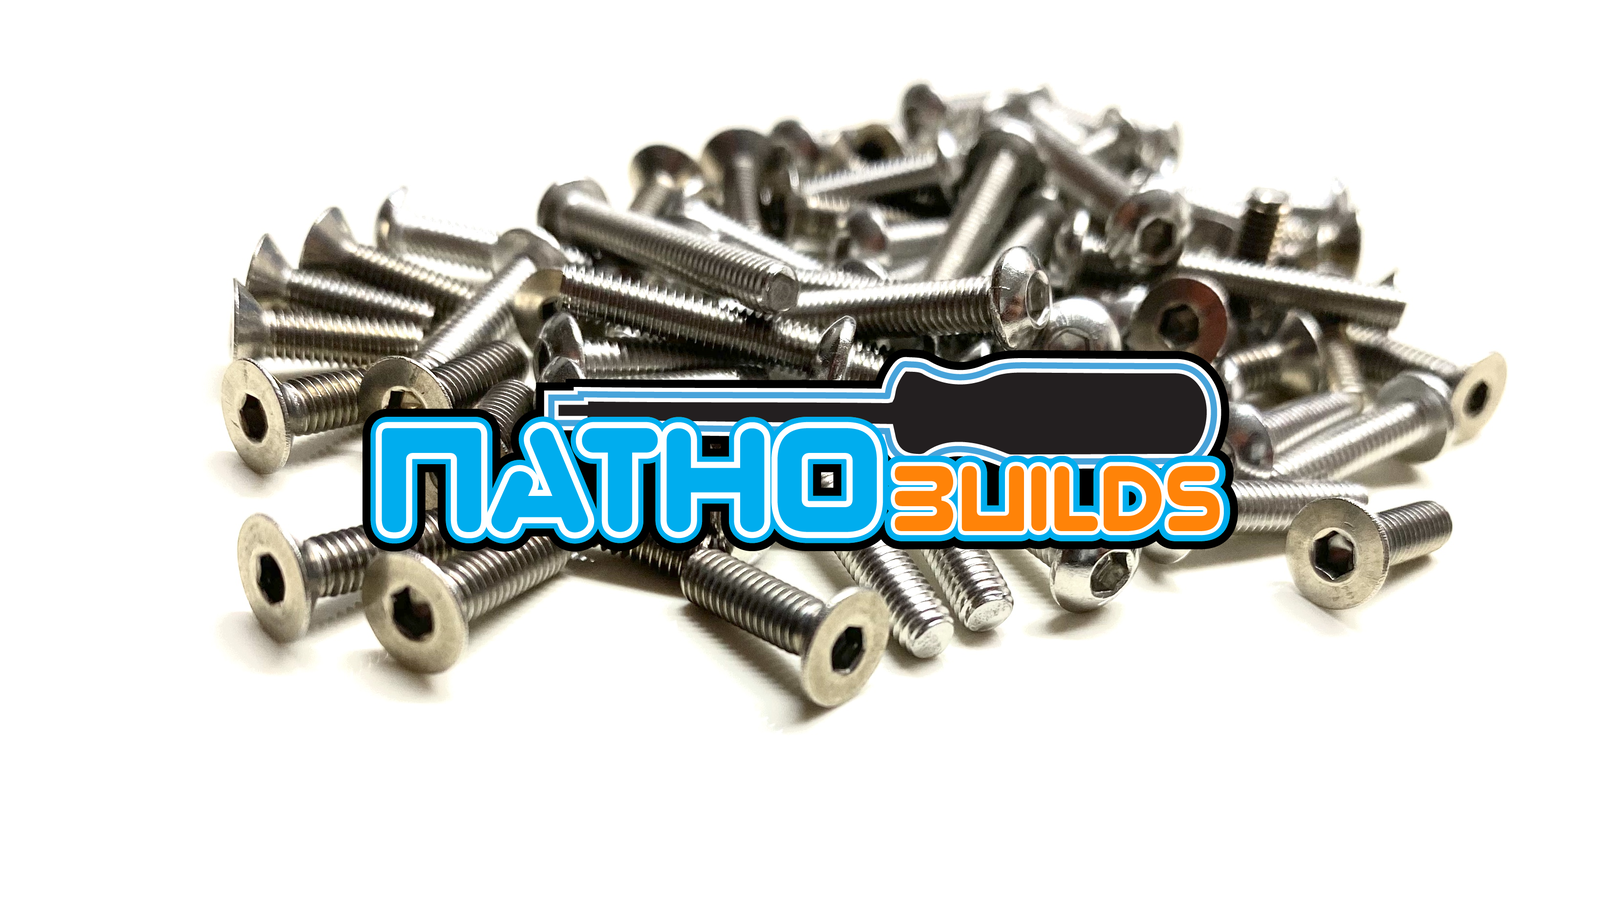 NathoBuilds: Stainless Steel Screw Kits for 1/8th - TLR 8IGHT-XE